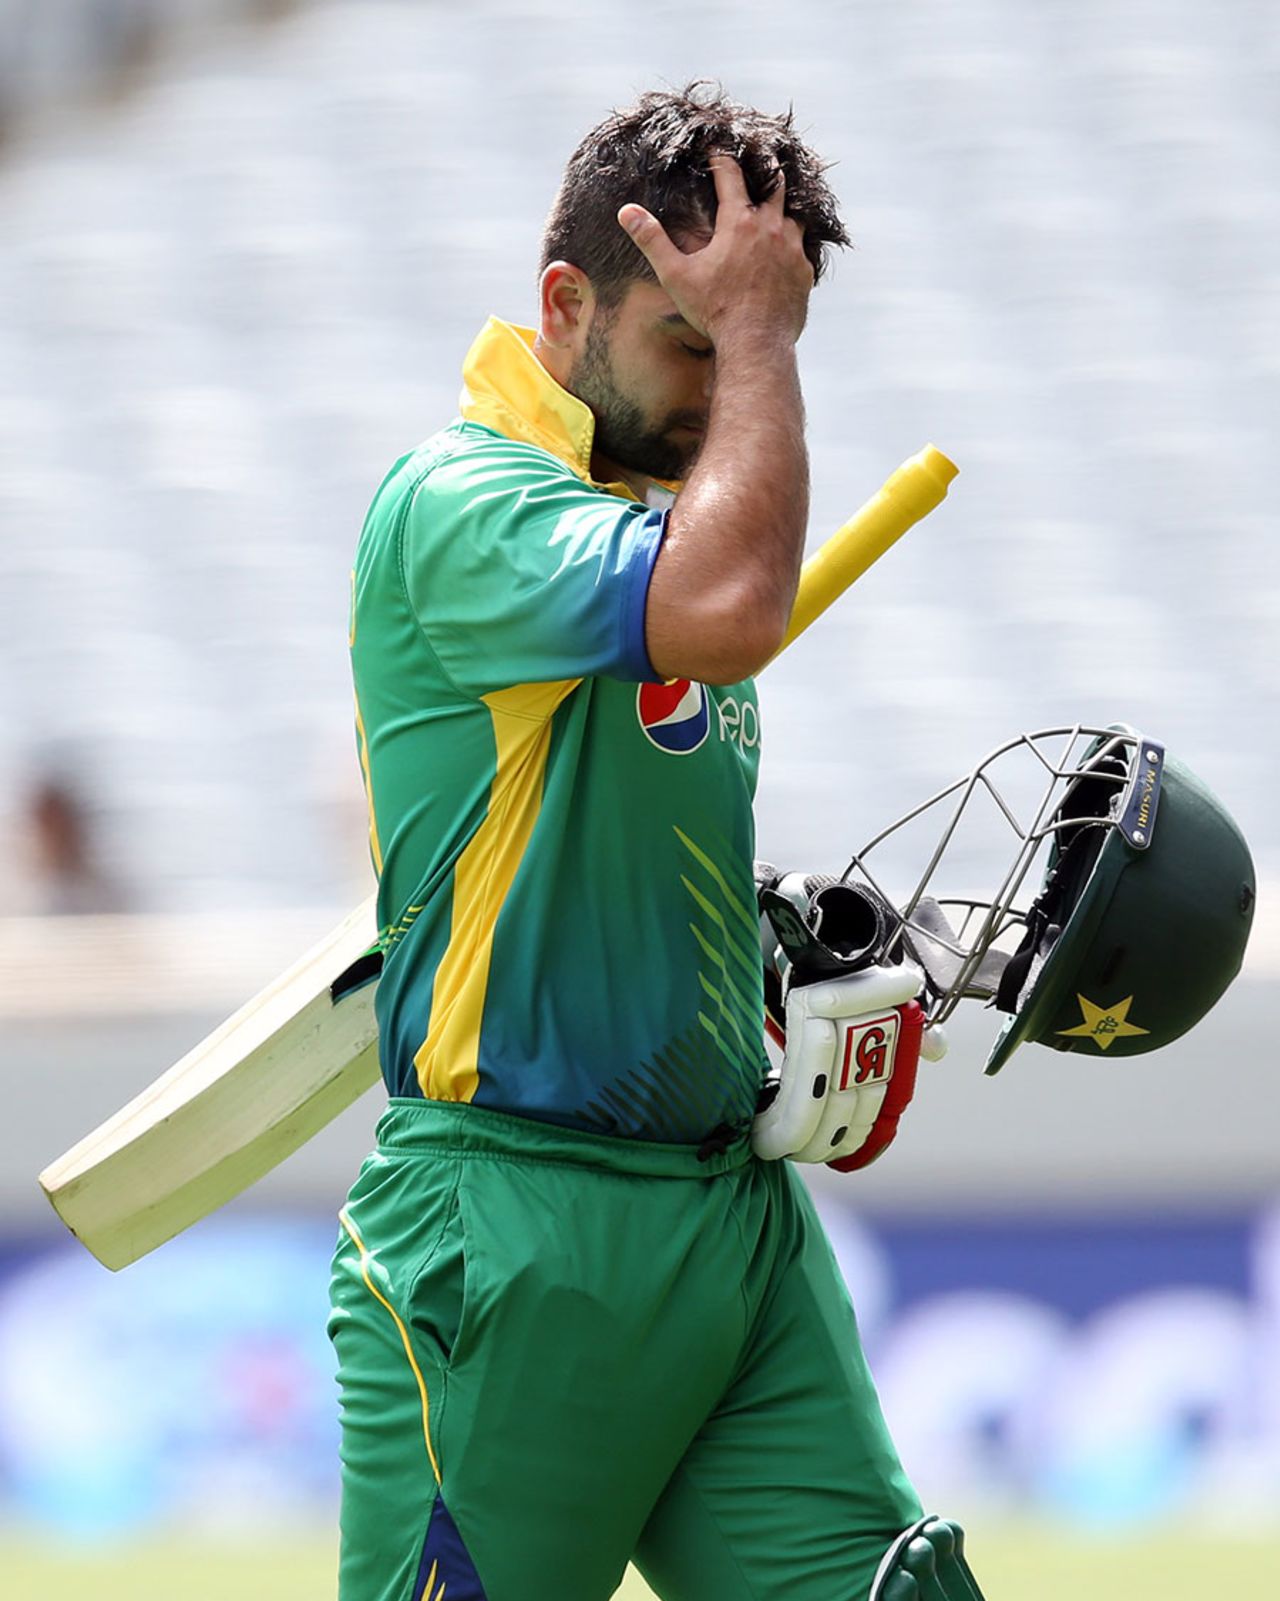 Ahmed Shehzad was out for 12, New Zealand v Pakistan, 3rd ODI, Auckland, January 31, 2016